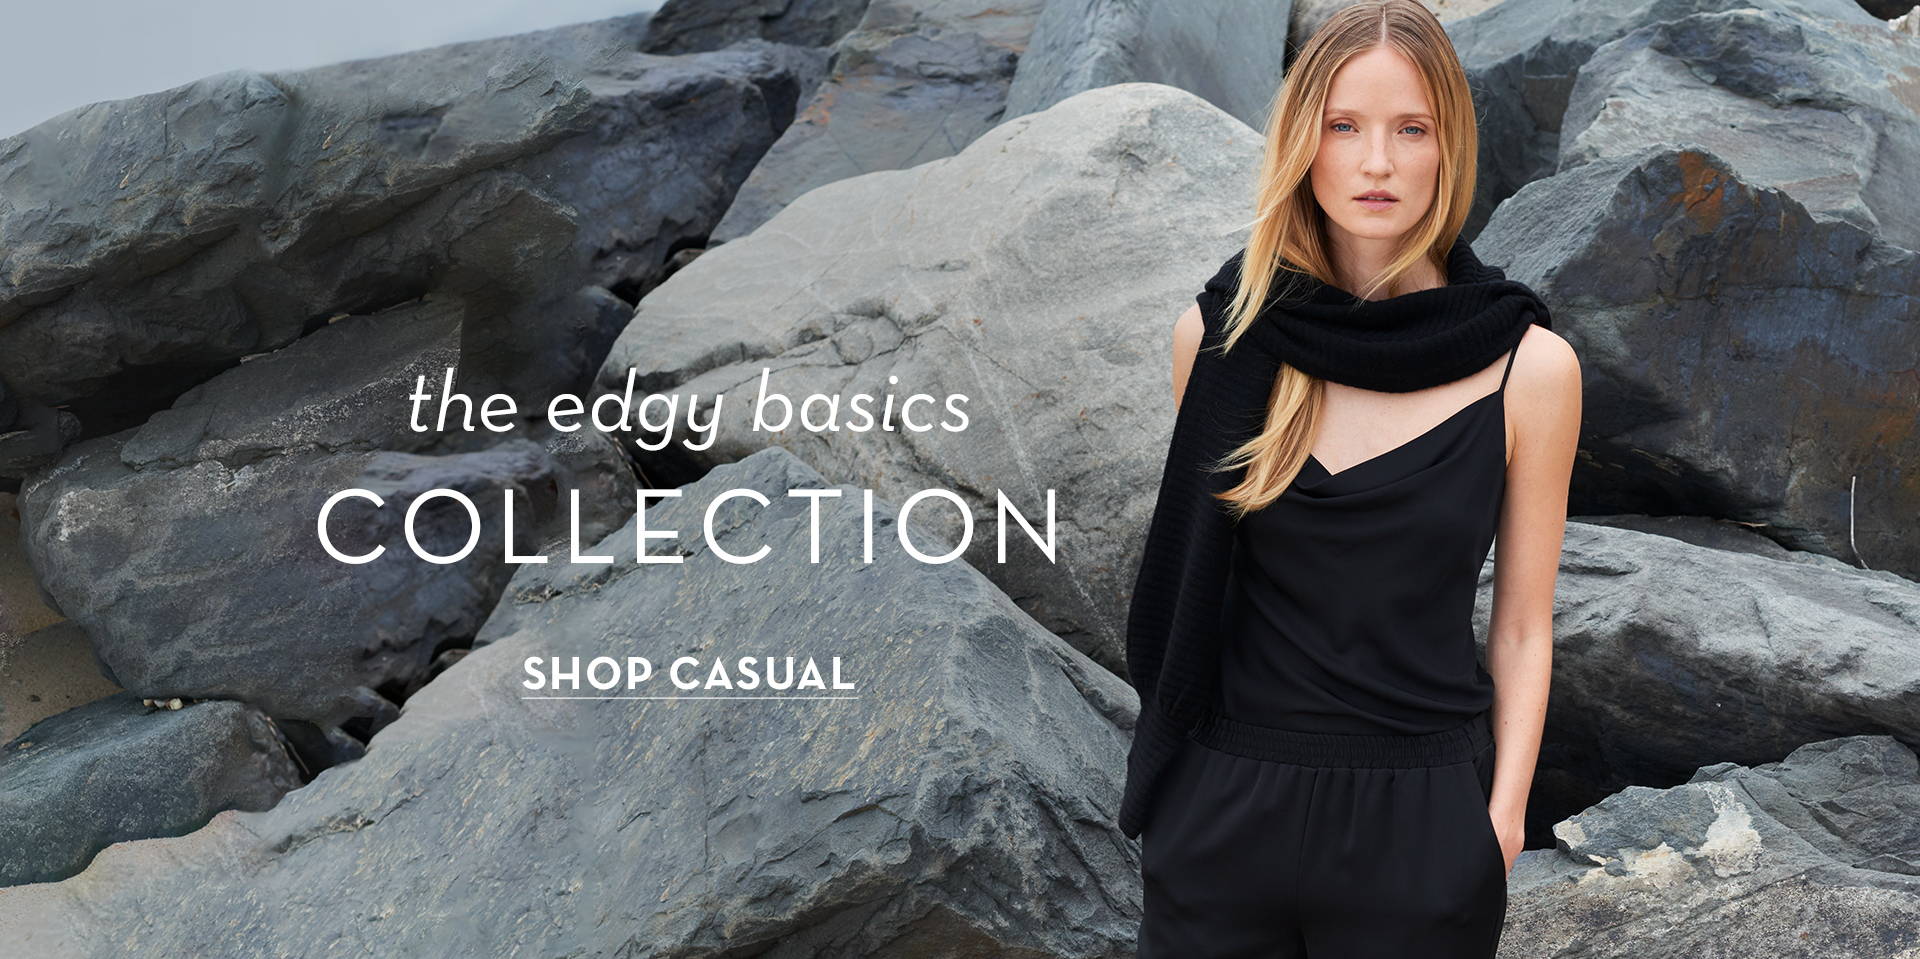 The edgy basic collection, shop casual